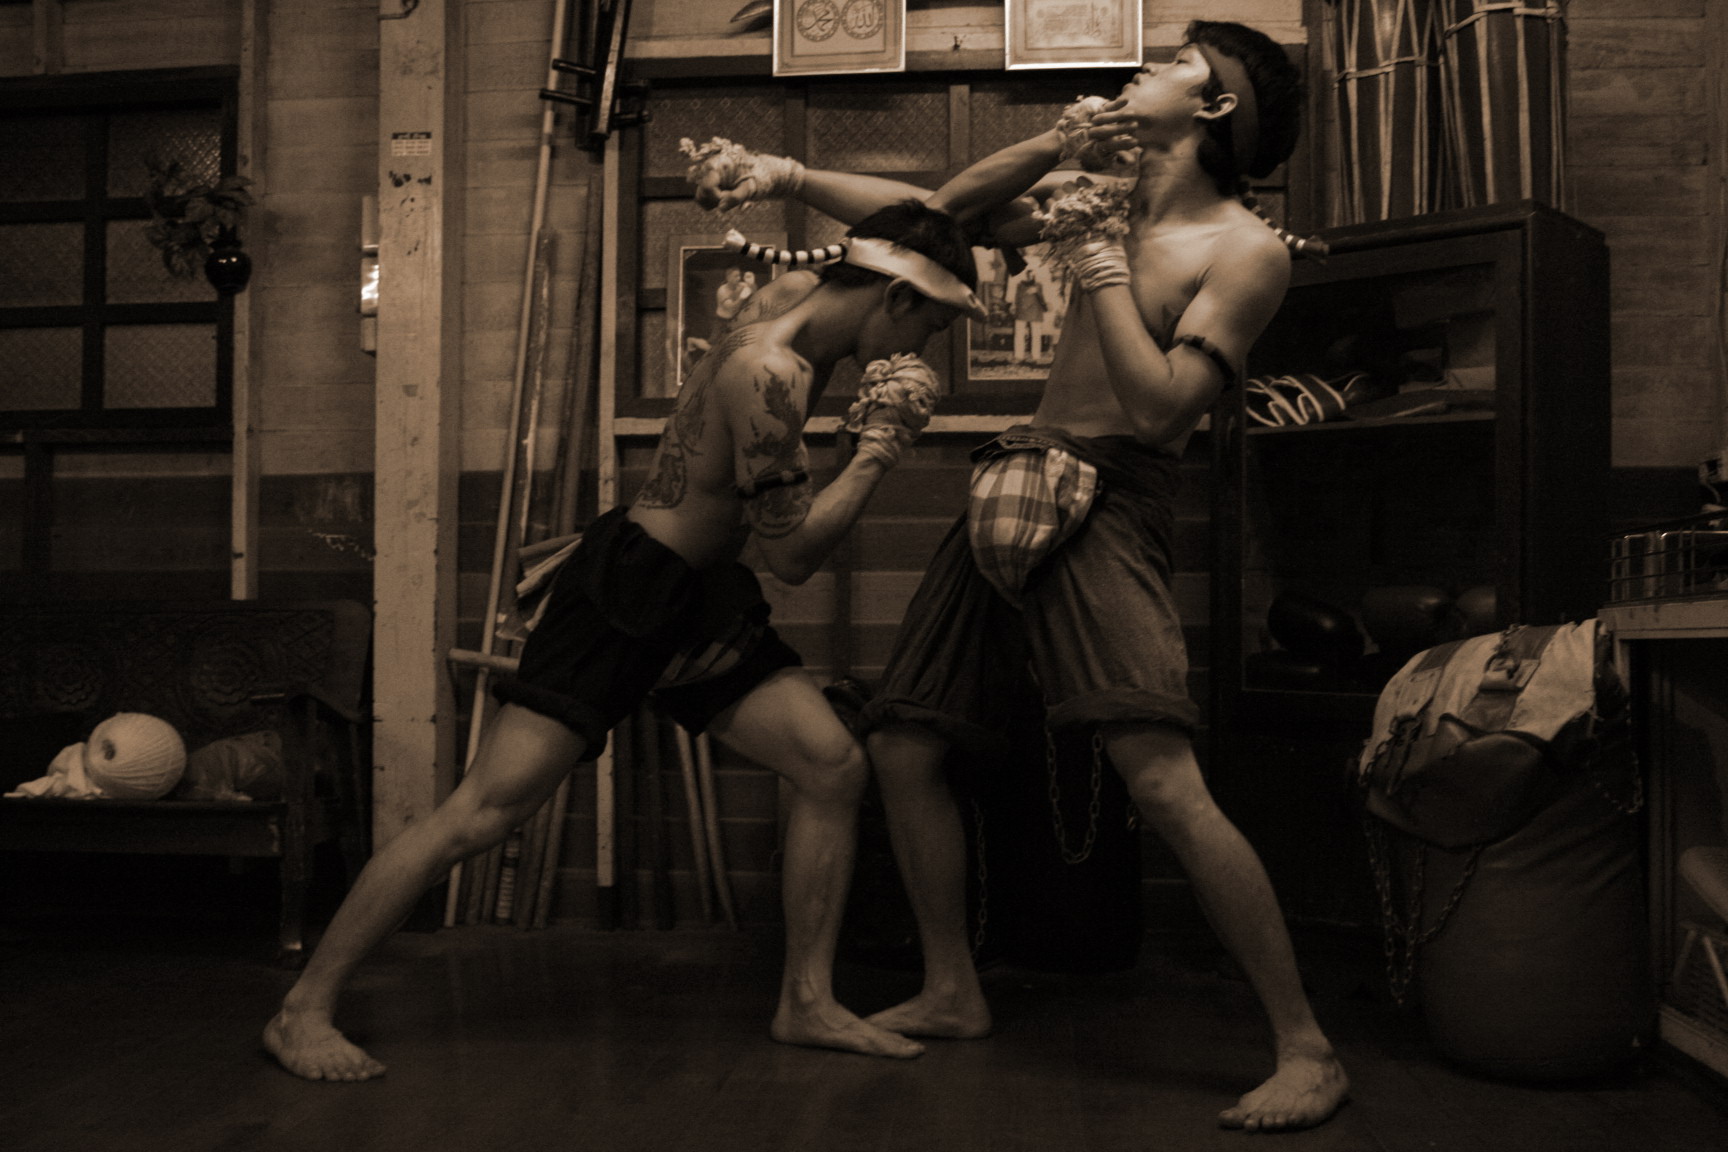 Muay Thai is often referred to as the "Art of Eight Limbs" for its use of the body as a weapon